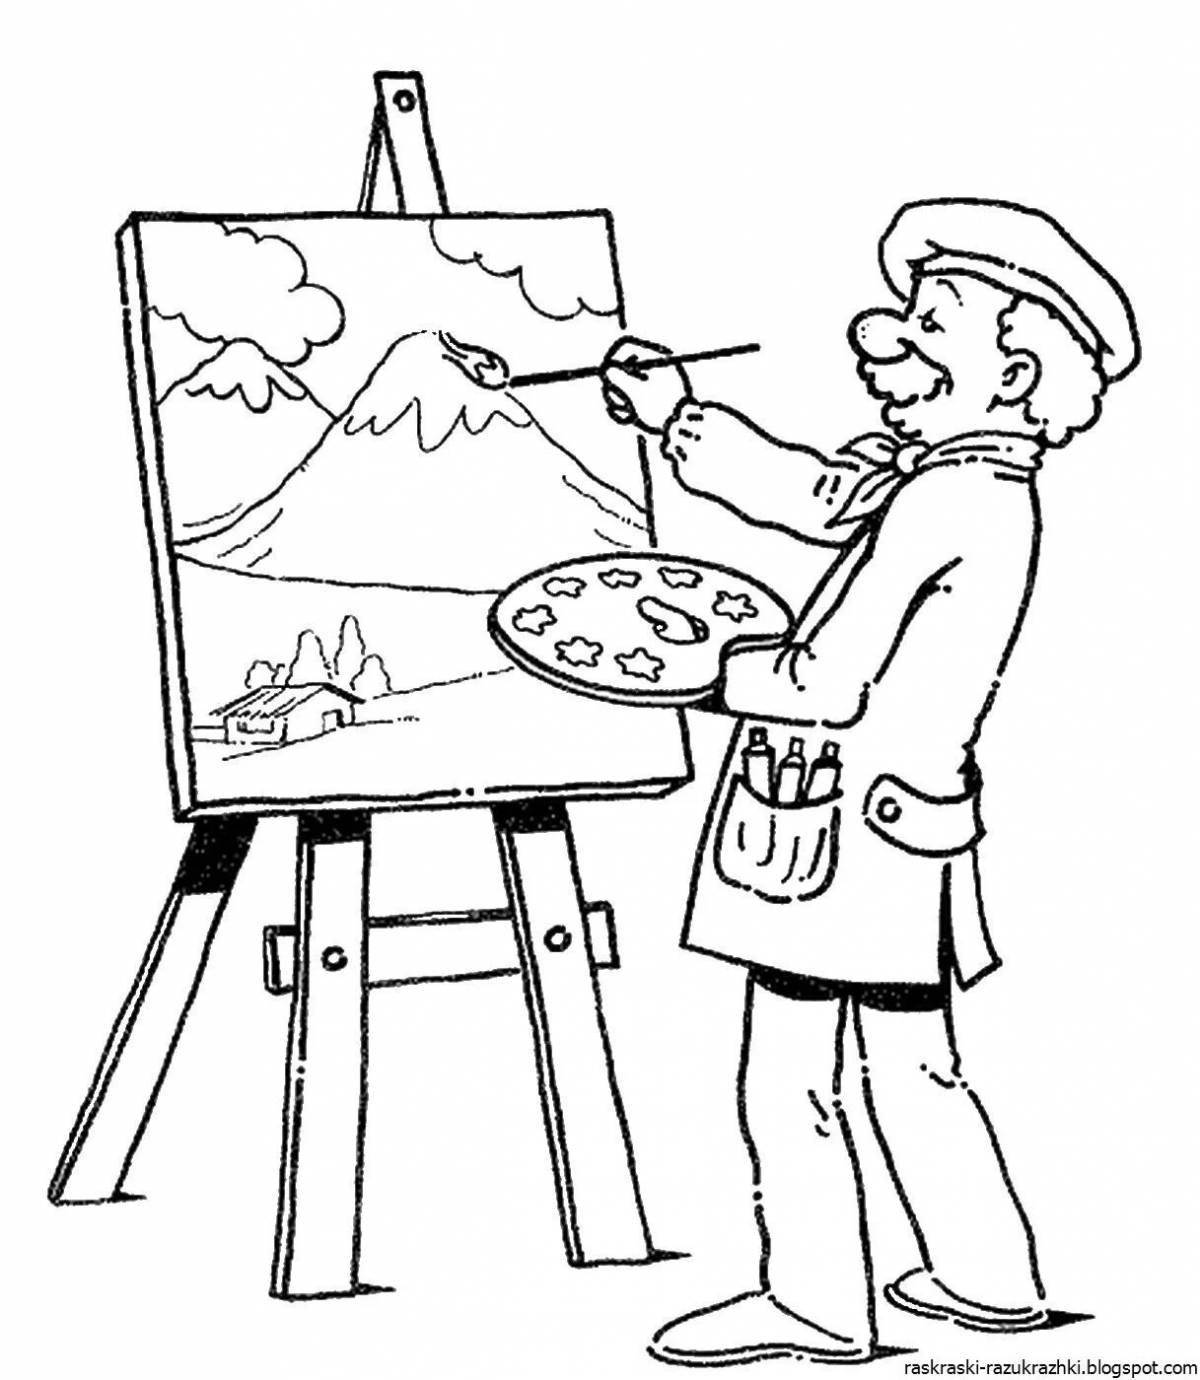 Unique coloring world of professions for children